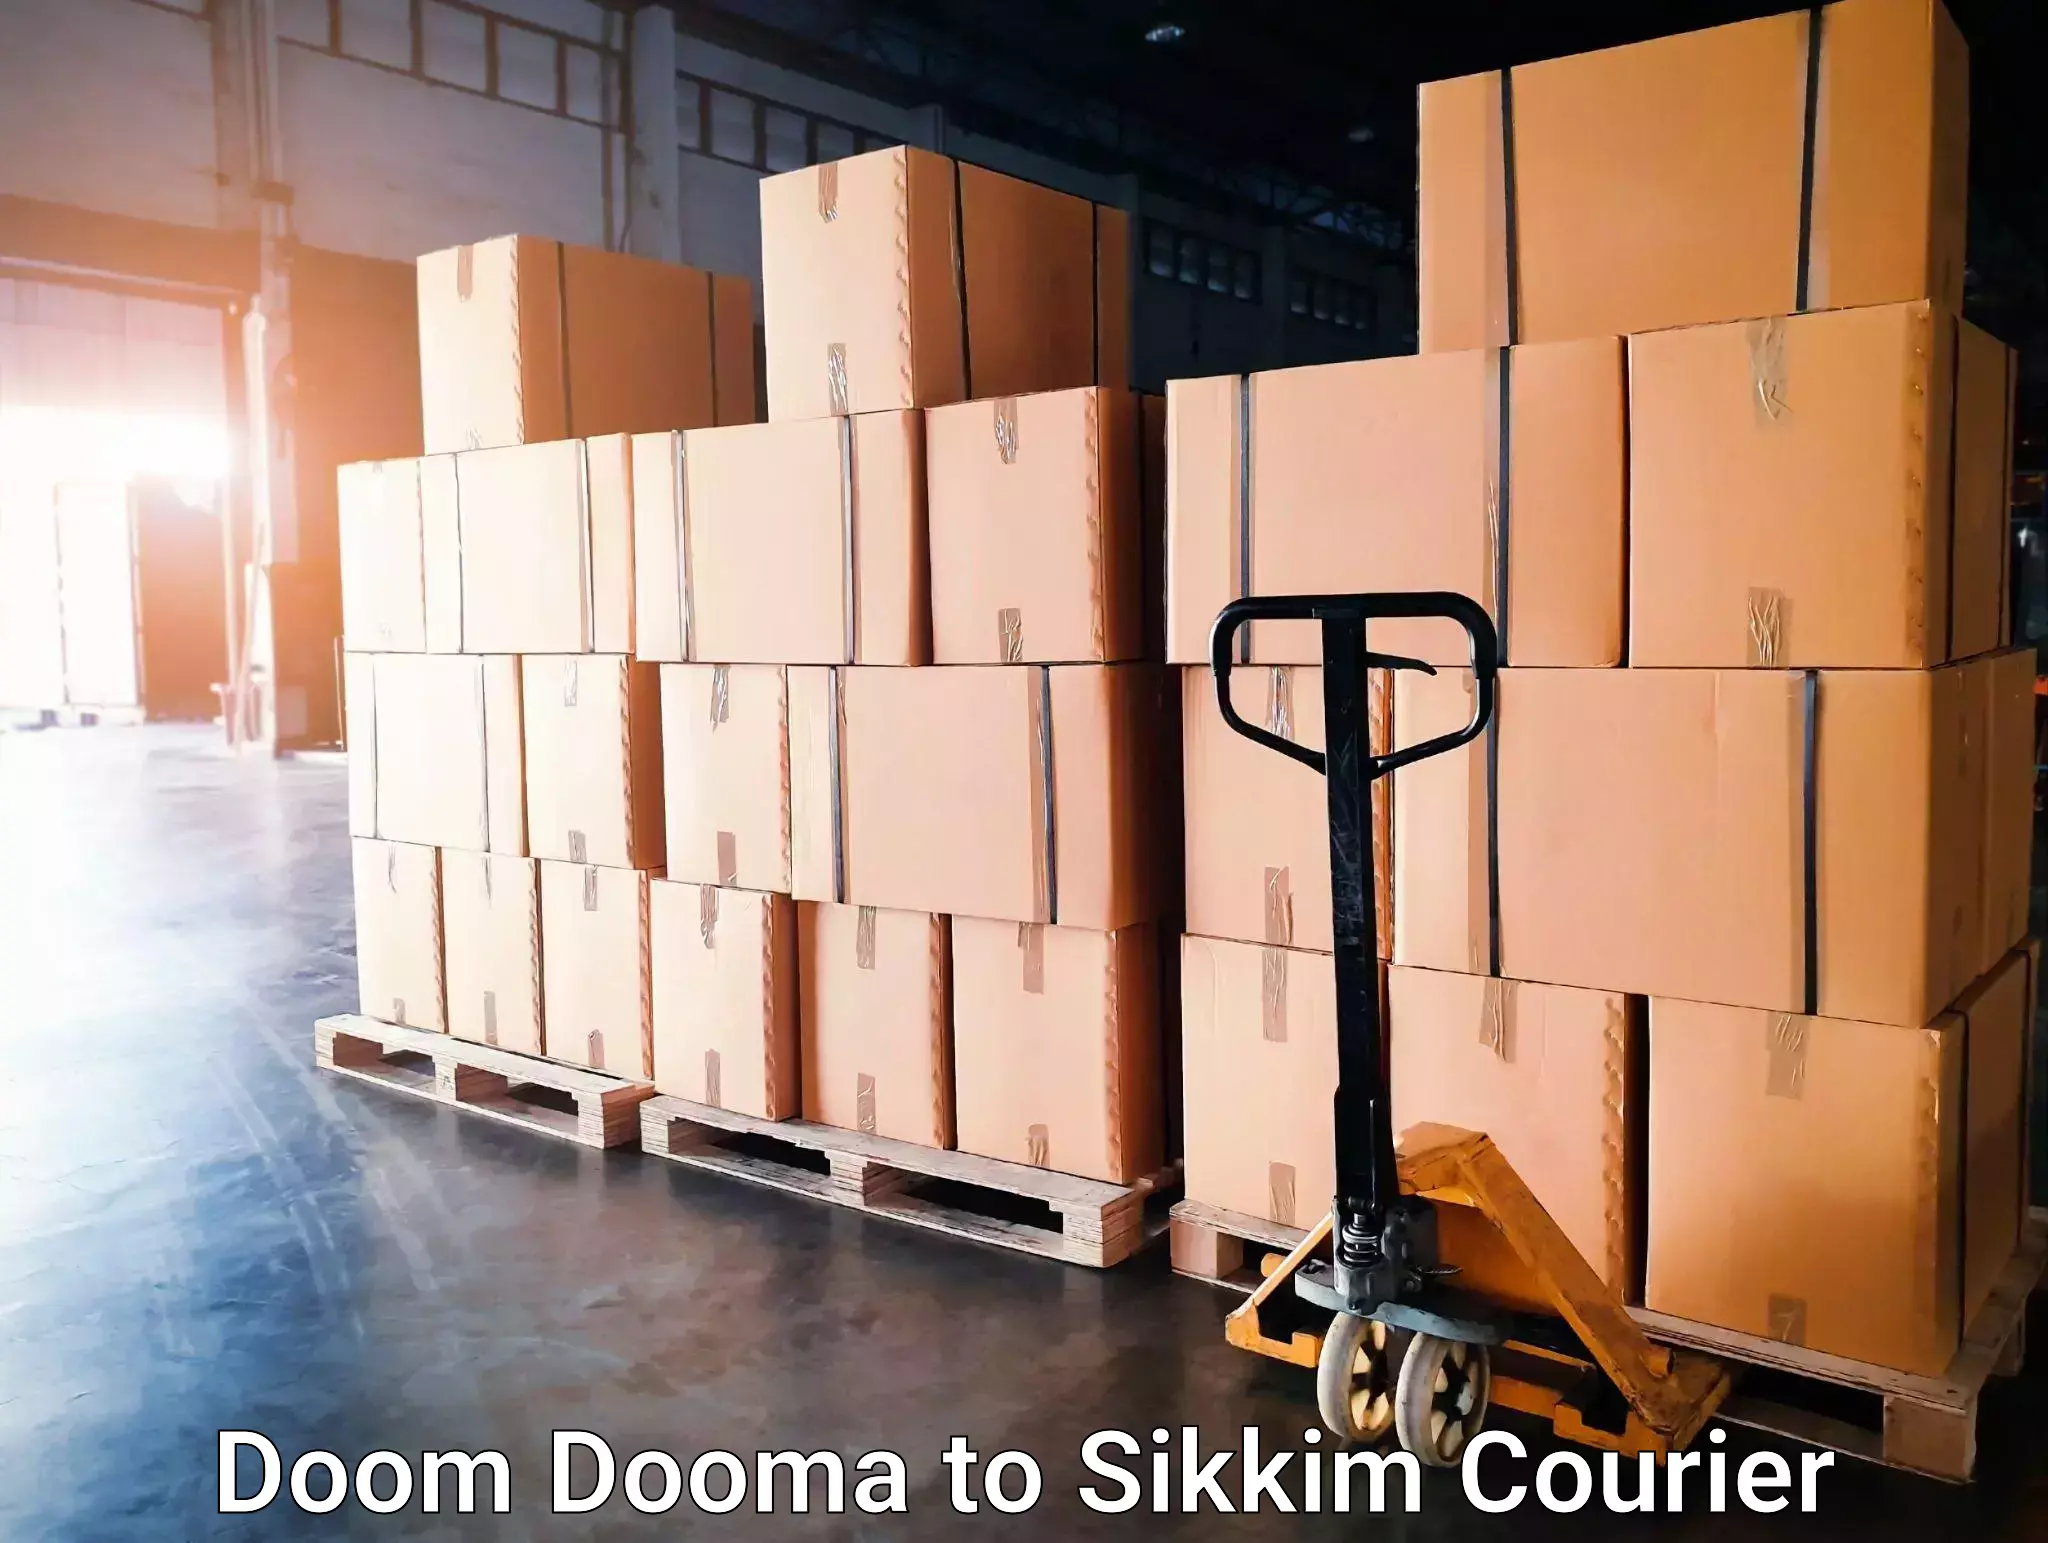 Courier dispatch services Doom Dooma to Mangan